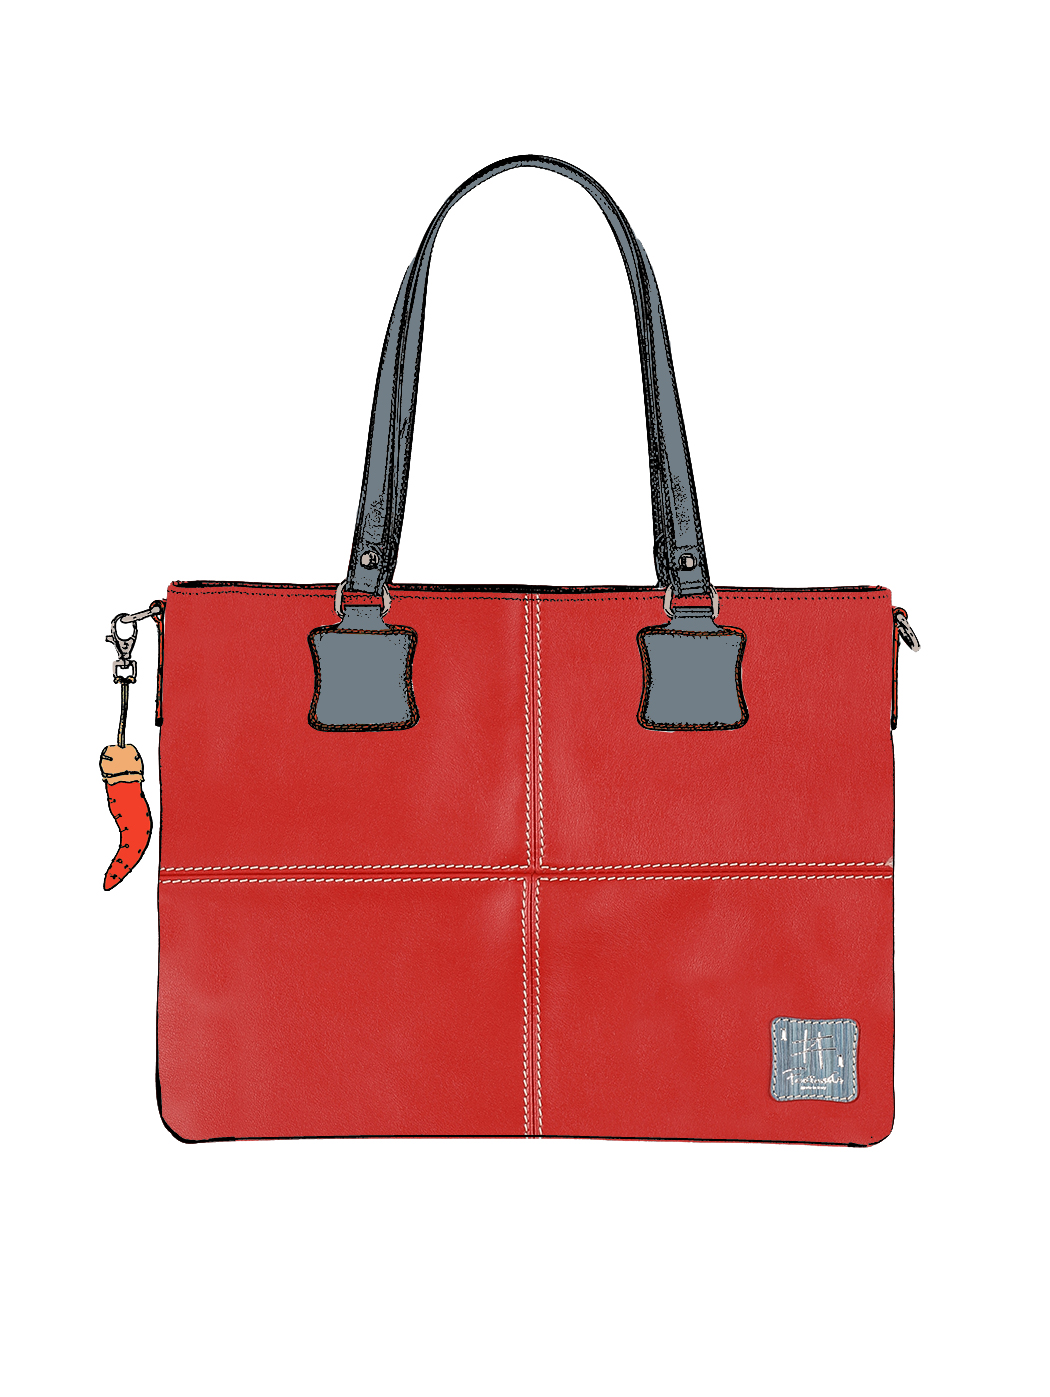 Shoulder Tote Convertible Bag Leather Red - Handmade in Italy